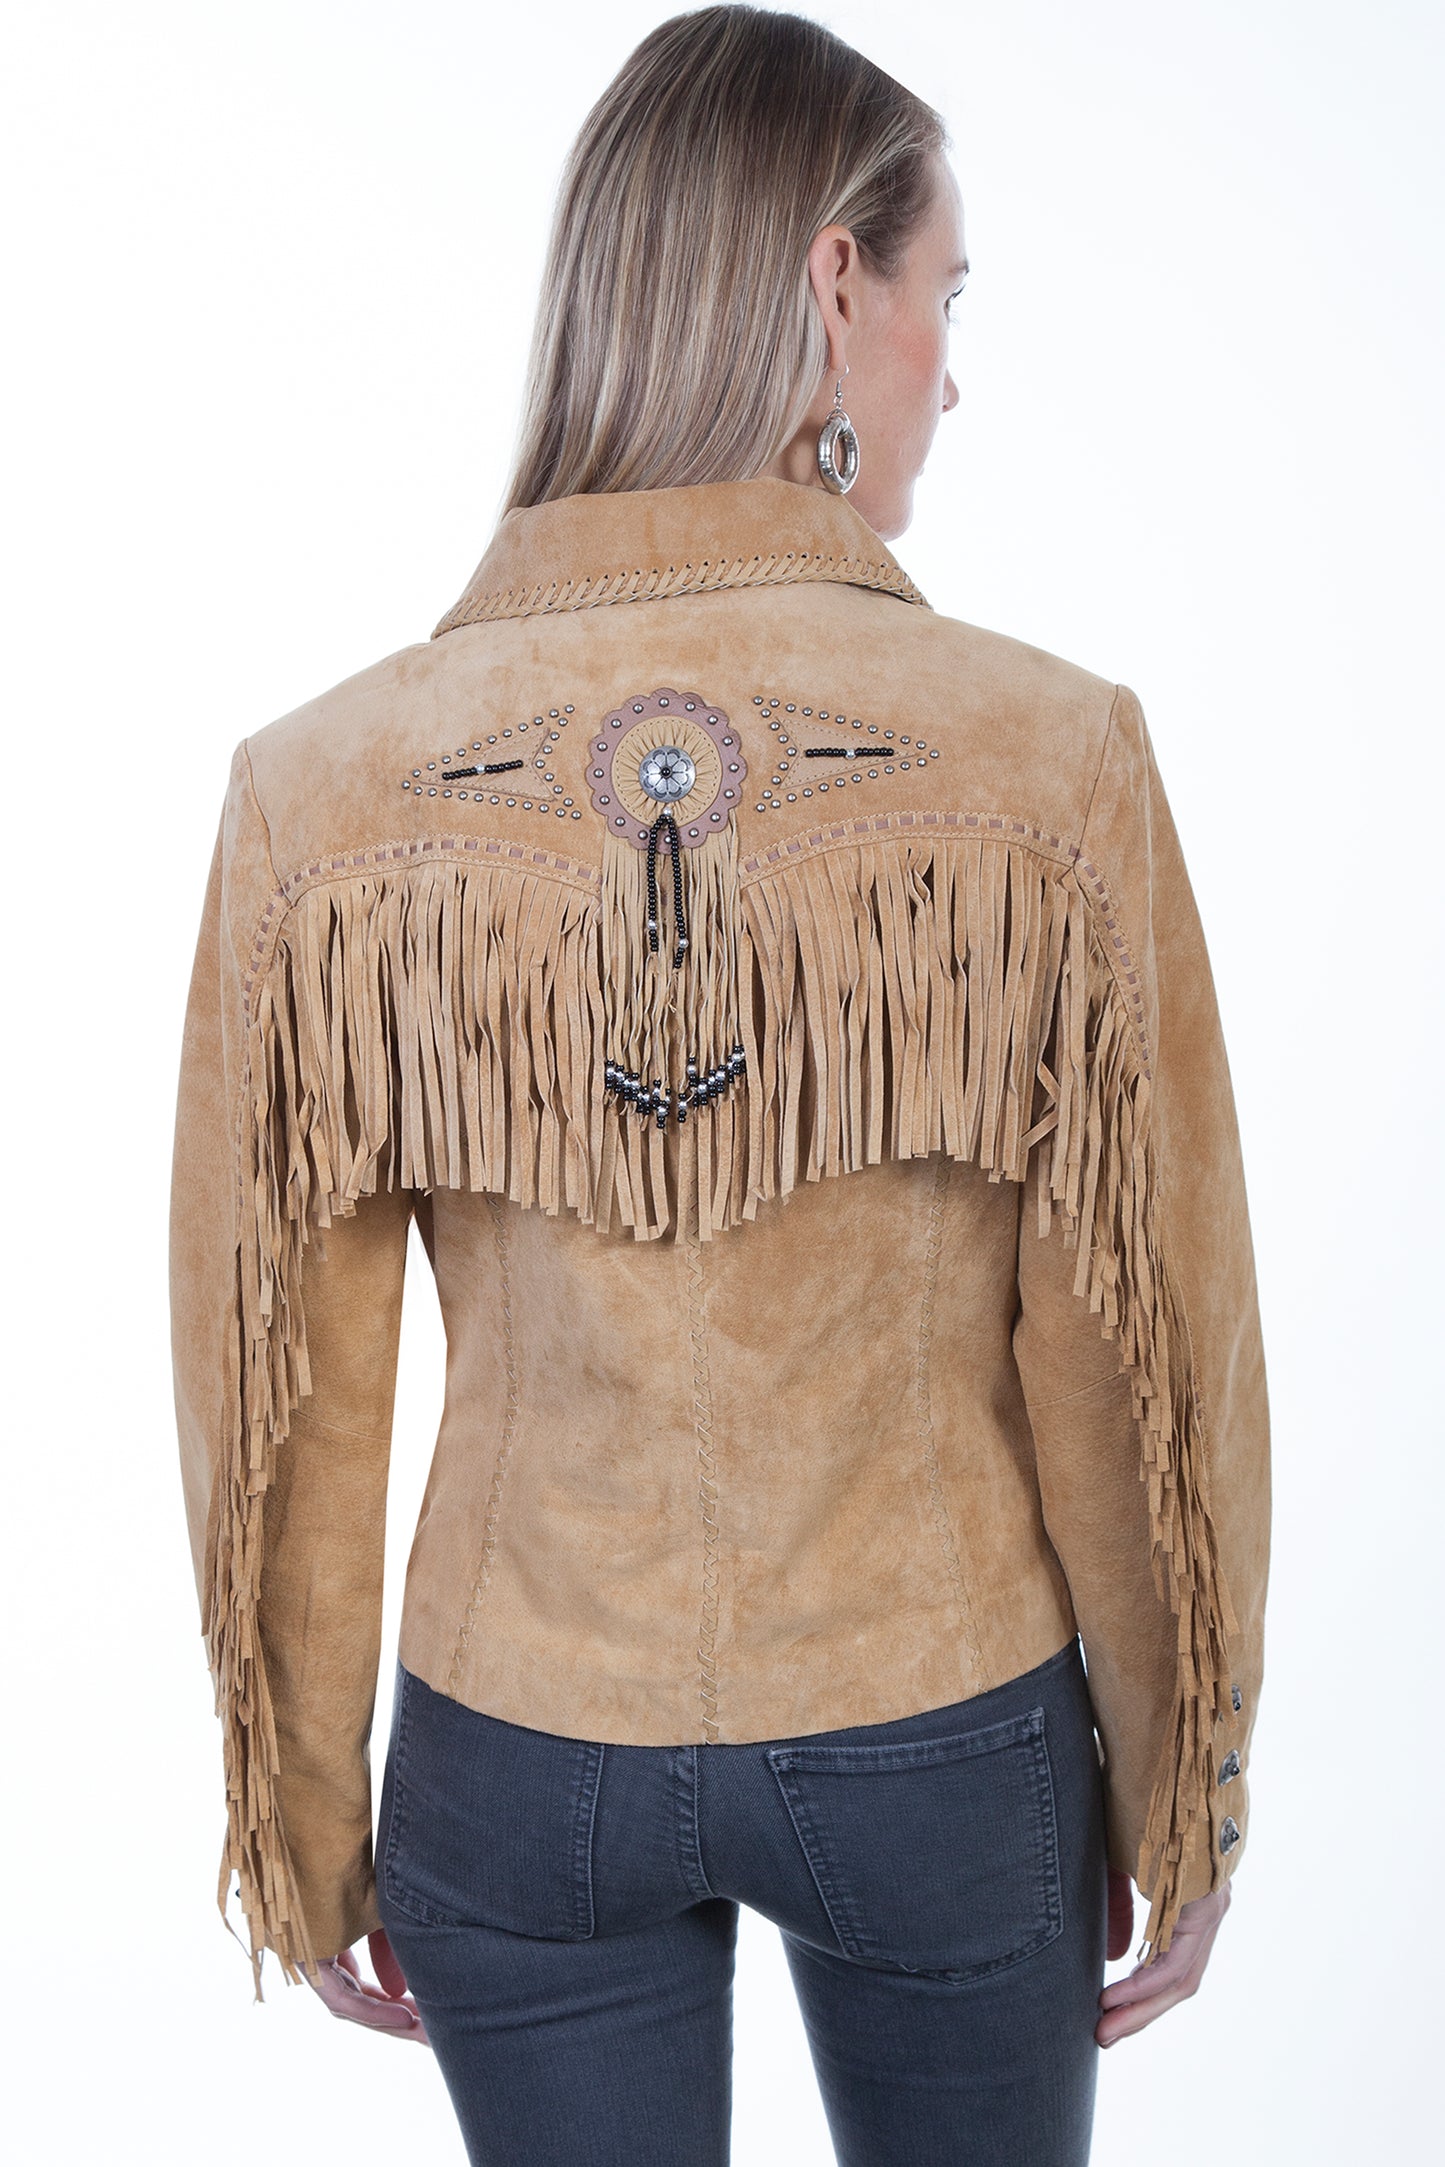 Old Rust Fringe & Beaded Suede Jacket at Bourbon Cowgirl